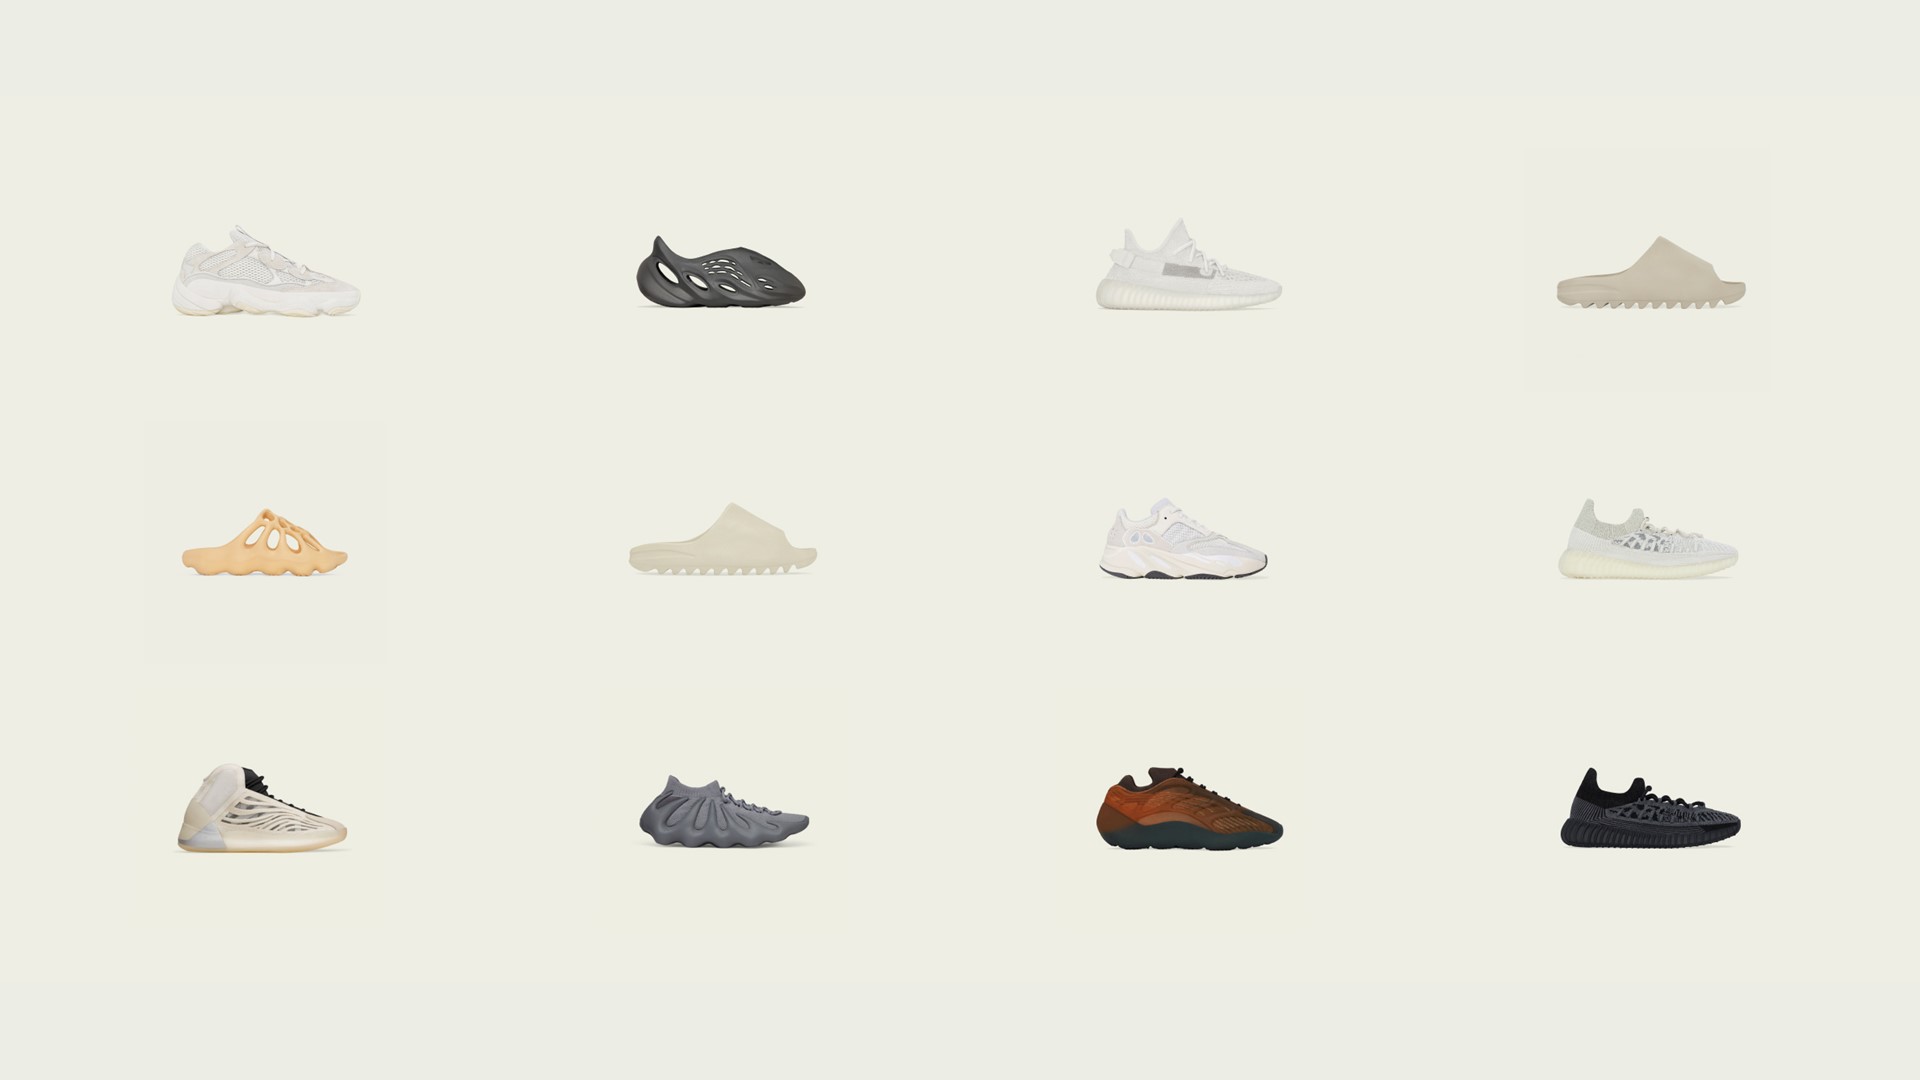 majs loyalitet Sydøst adidas announces further release of existing Yeezy products in August with  continued commitment to combatting discrimination and hate